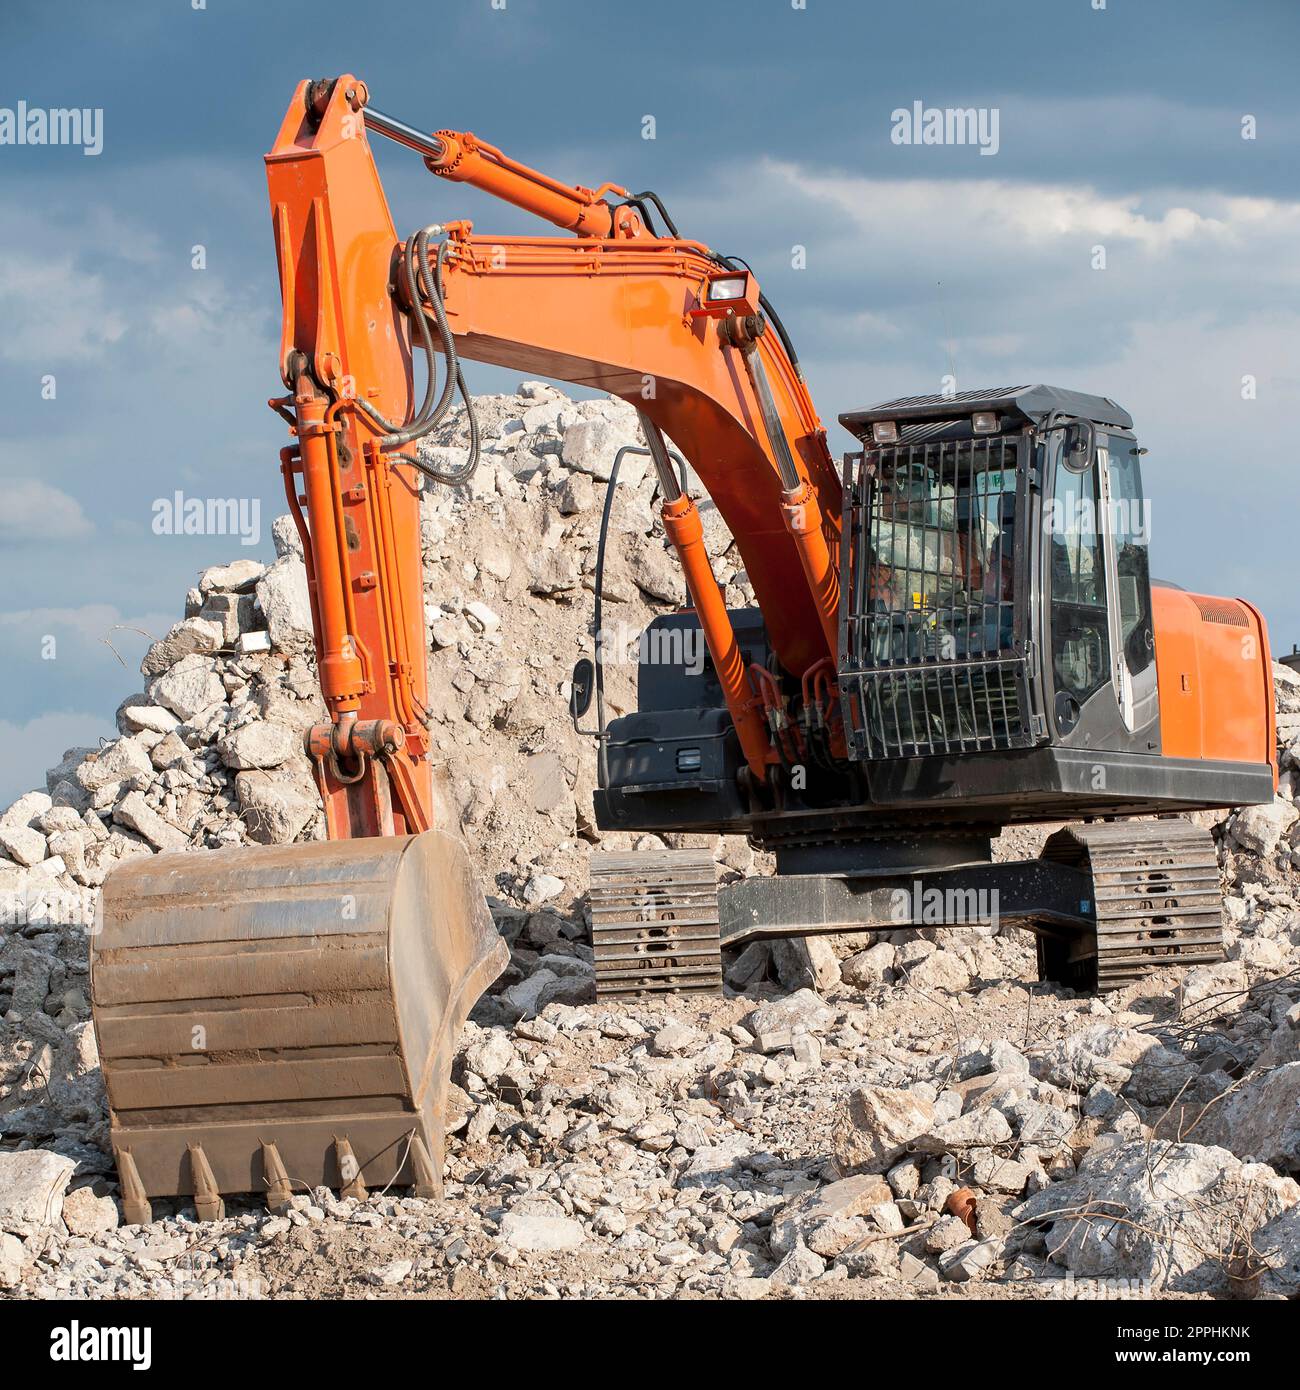 Square photo of an excavator with chain wheels and shovel standing on a pile of rubble without logos and other legal identifiers. Stock Photo